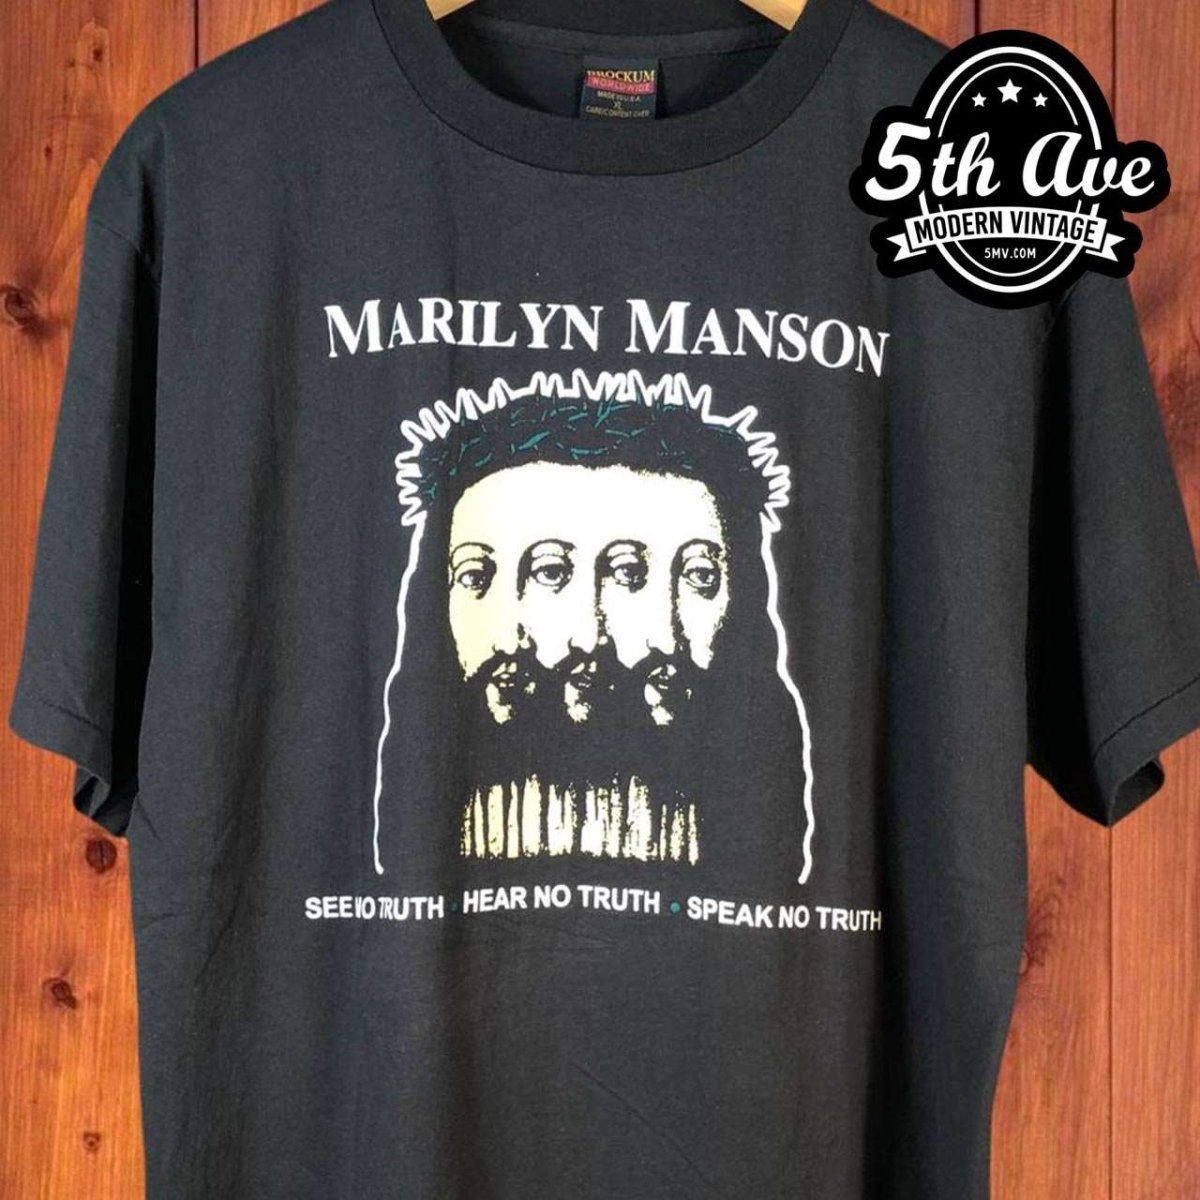 Marilyn Manson Believe - New Vintage Band T shirt - Vintage Band Shirts